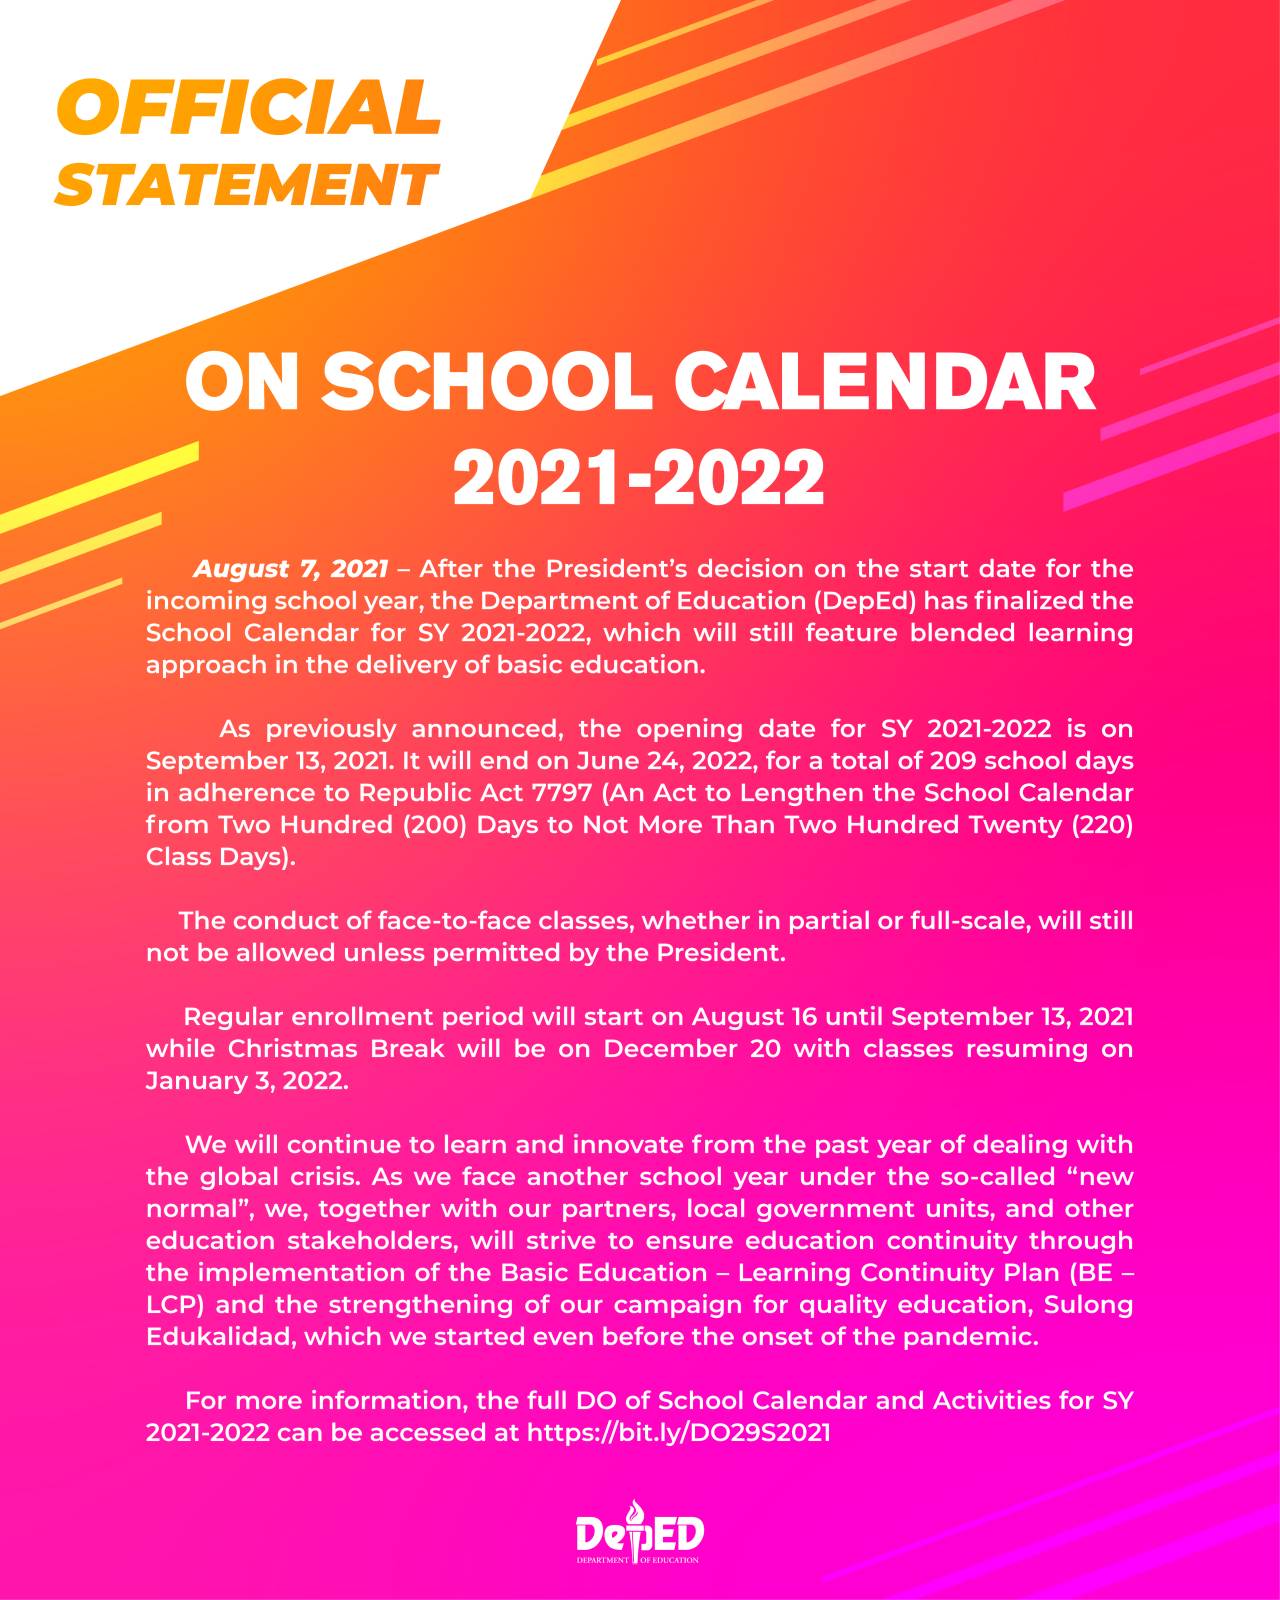 deped-school-calendar-and-activities-for-school-year-2021-2022-deped-tambayan-kulturaupice